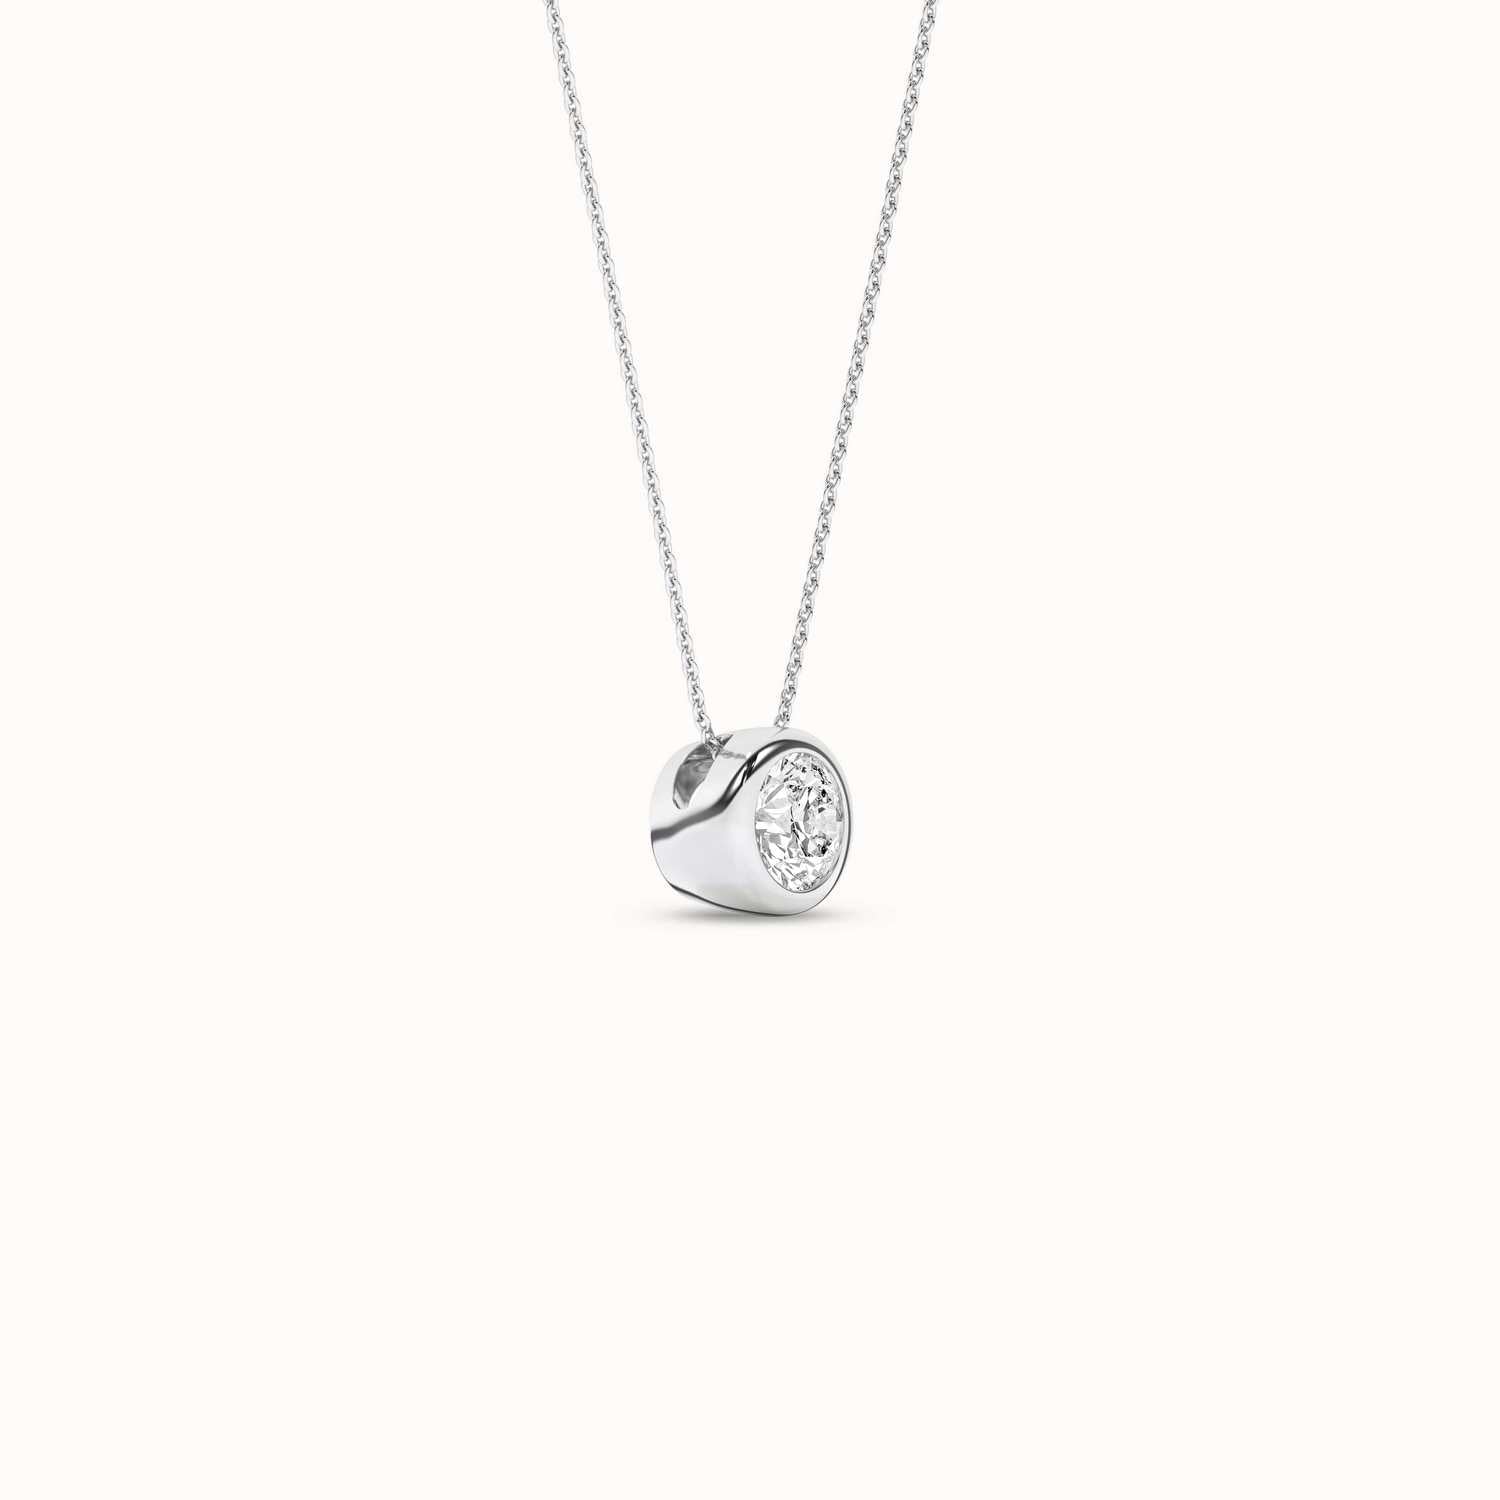 Encompassing Round Necklace_Product Angle_1/3Ct. - 2